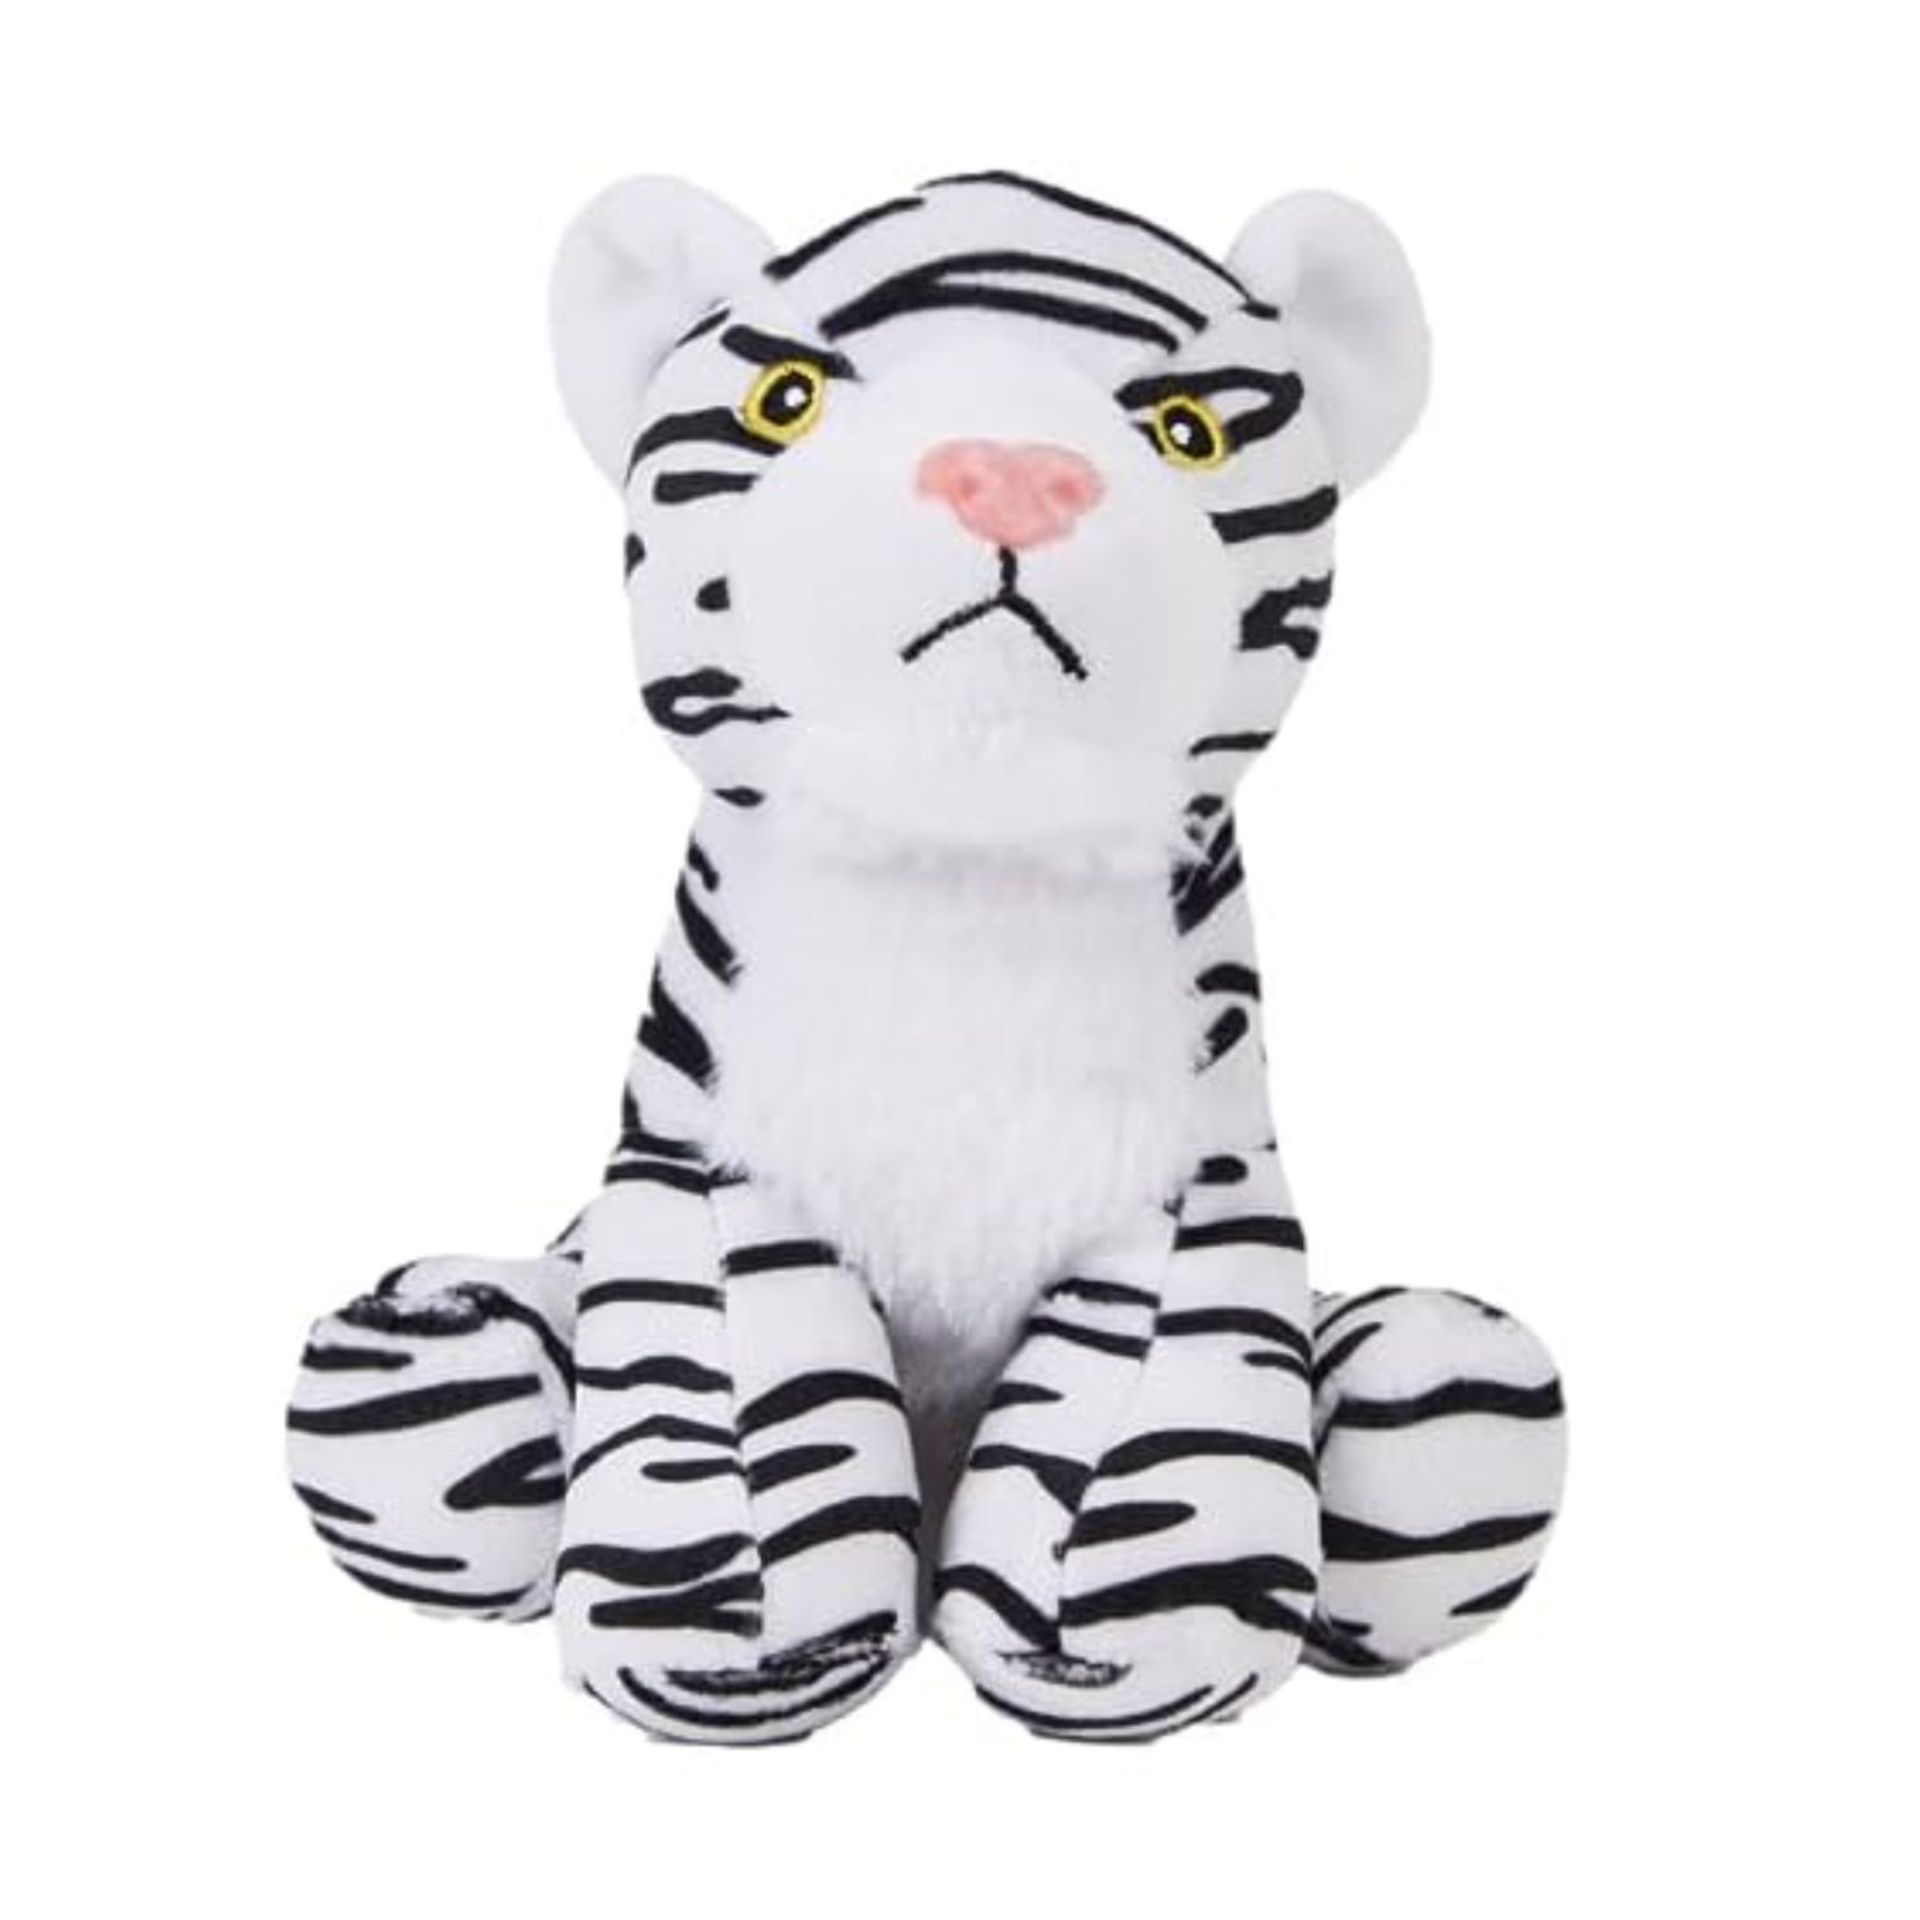 1000 X PLUSH TOYS, ASSORTMENT OF WHITE LION AND WHITE TIGER, RRP £10,000 - Image 2 of 2